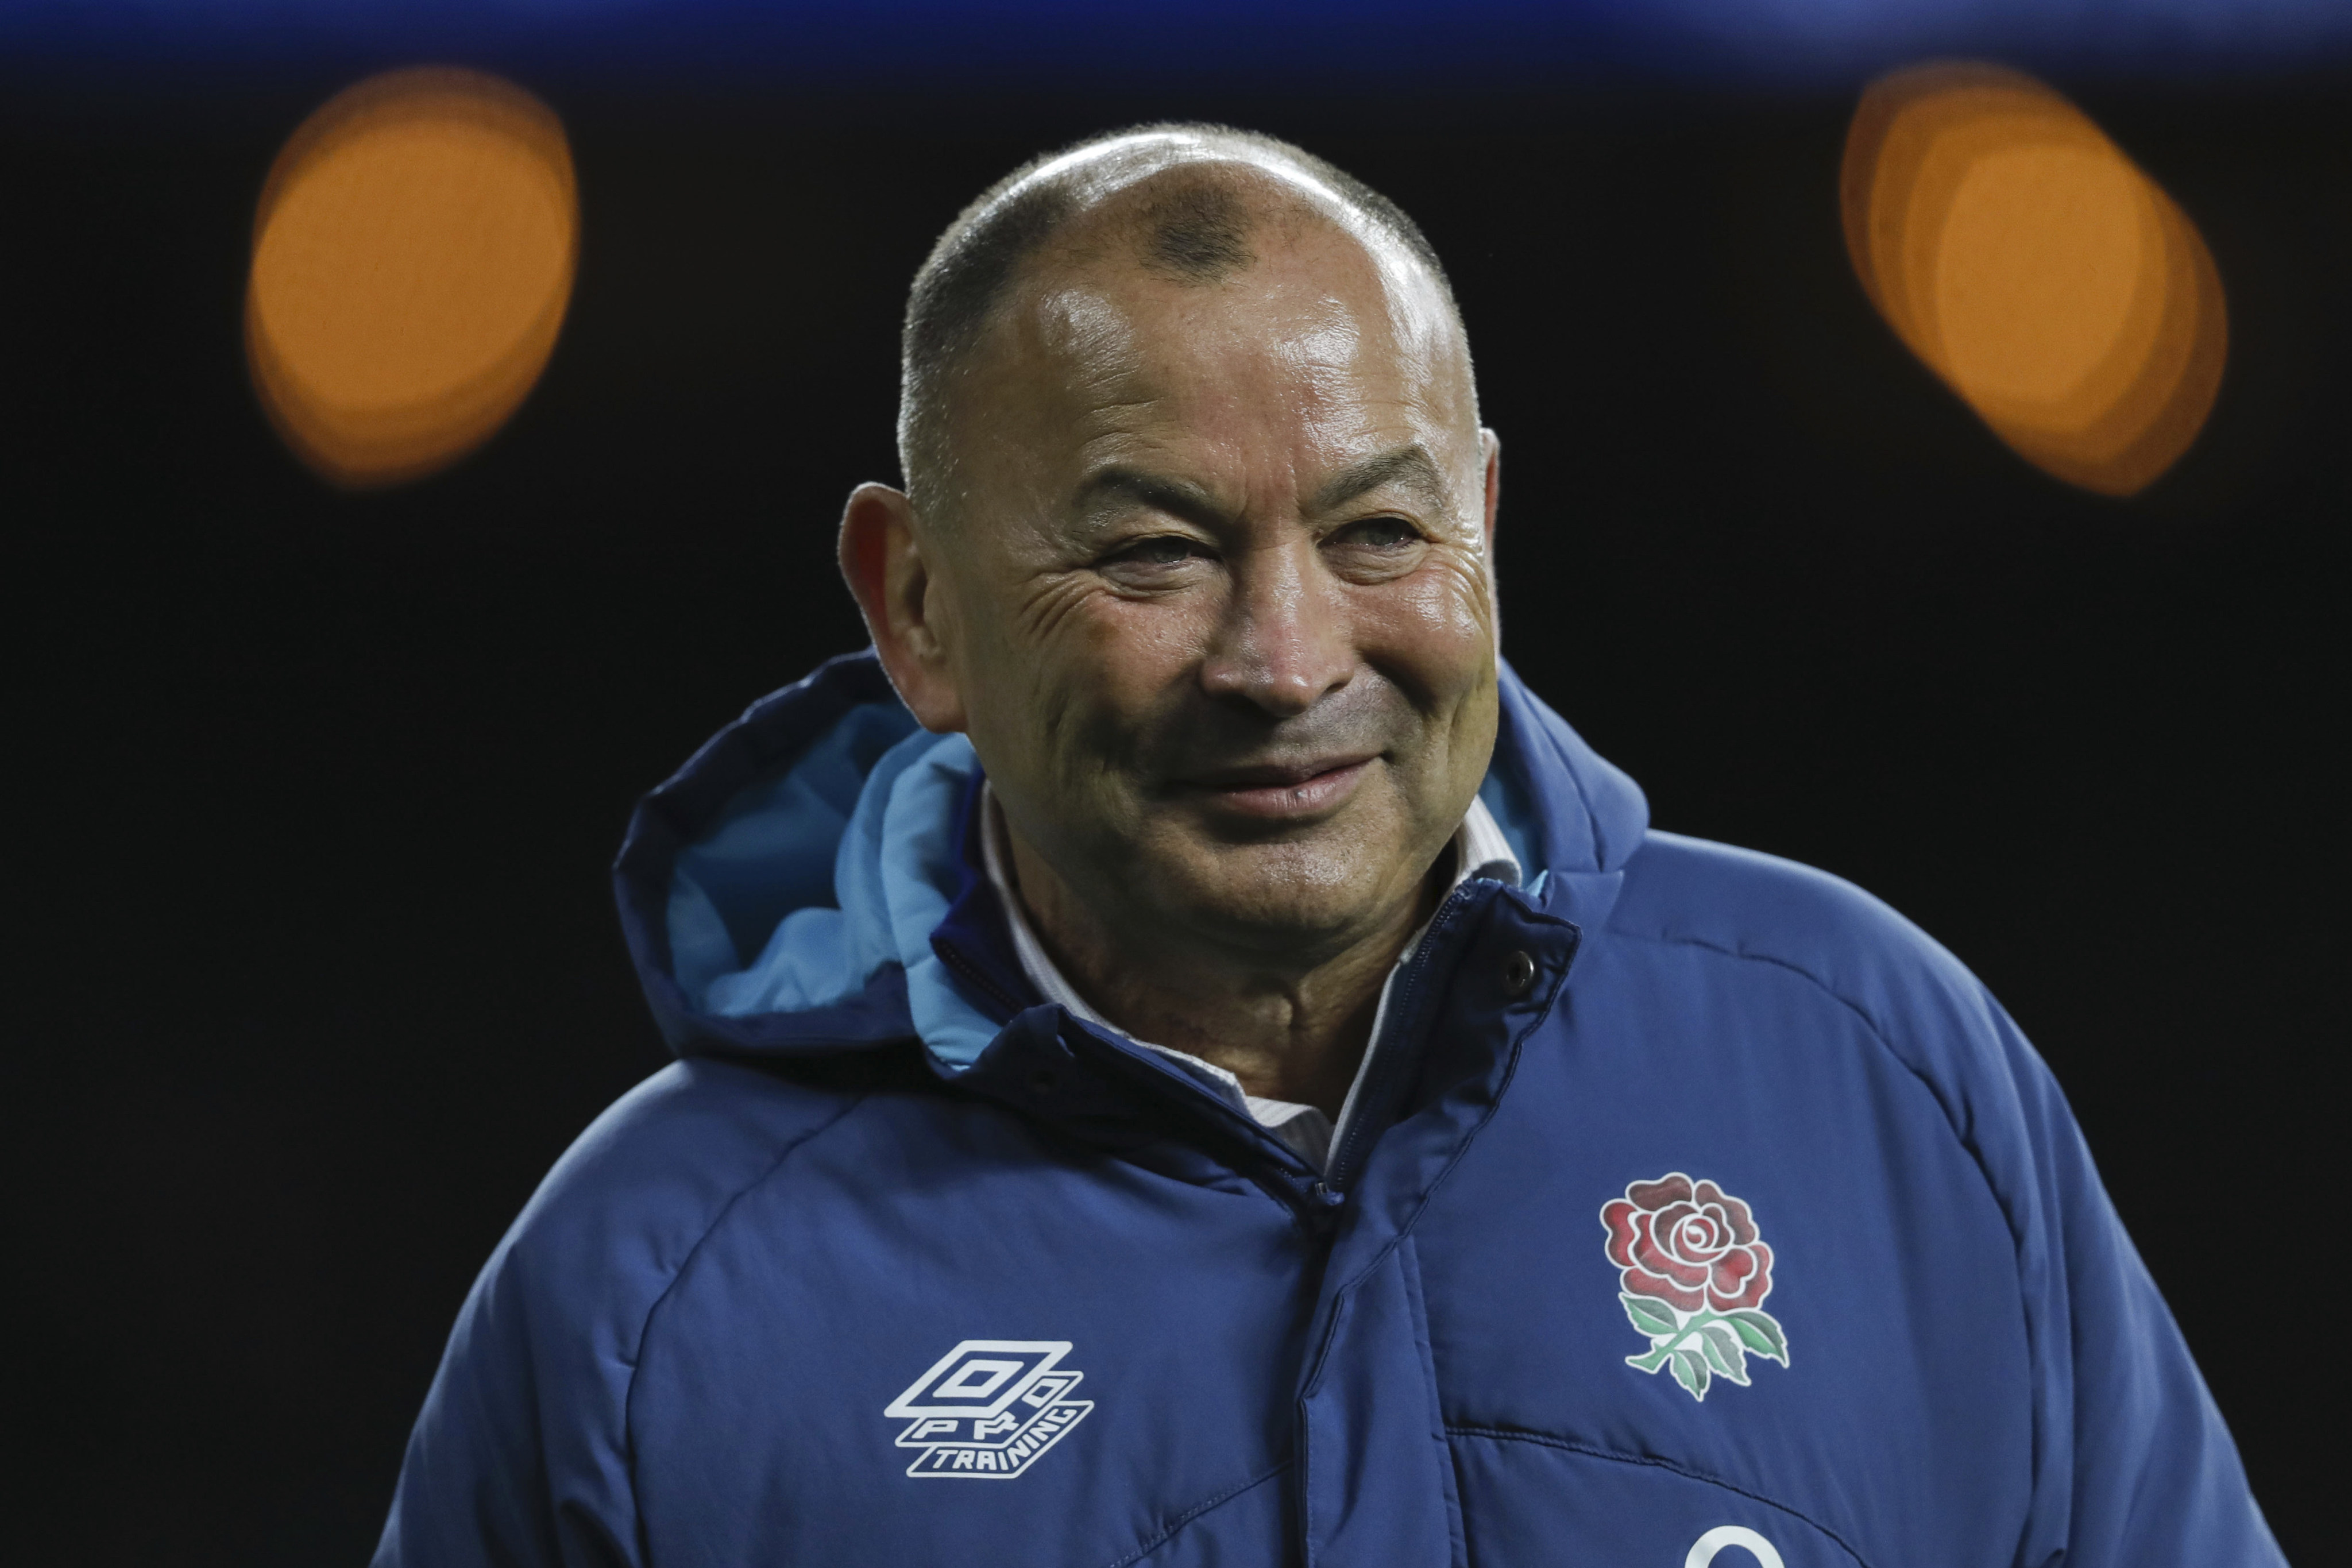 Eddie Jones has been named the new Wallabies coach after Rugby Australia sacked Dave Rennie. Photo: AP